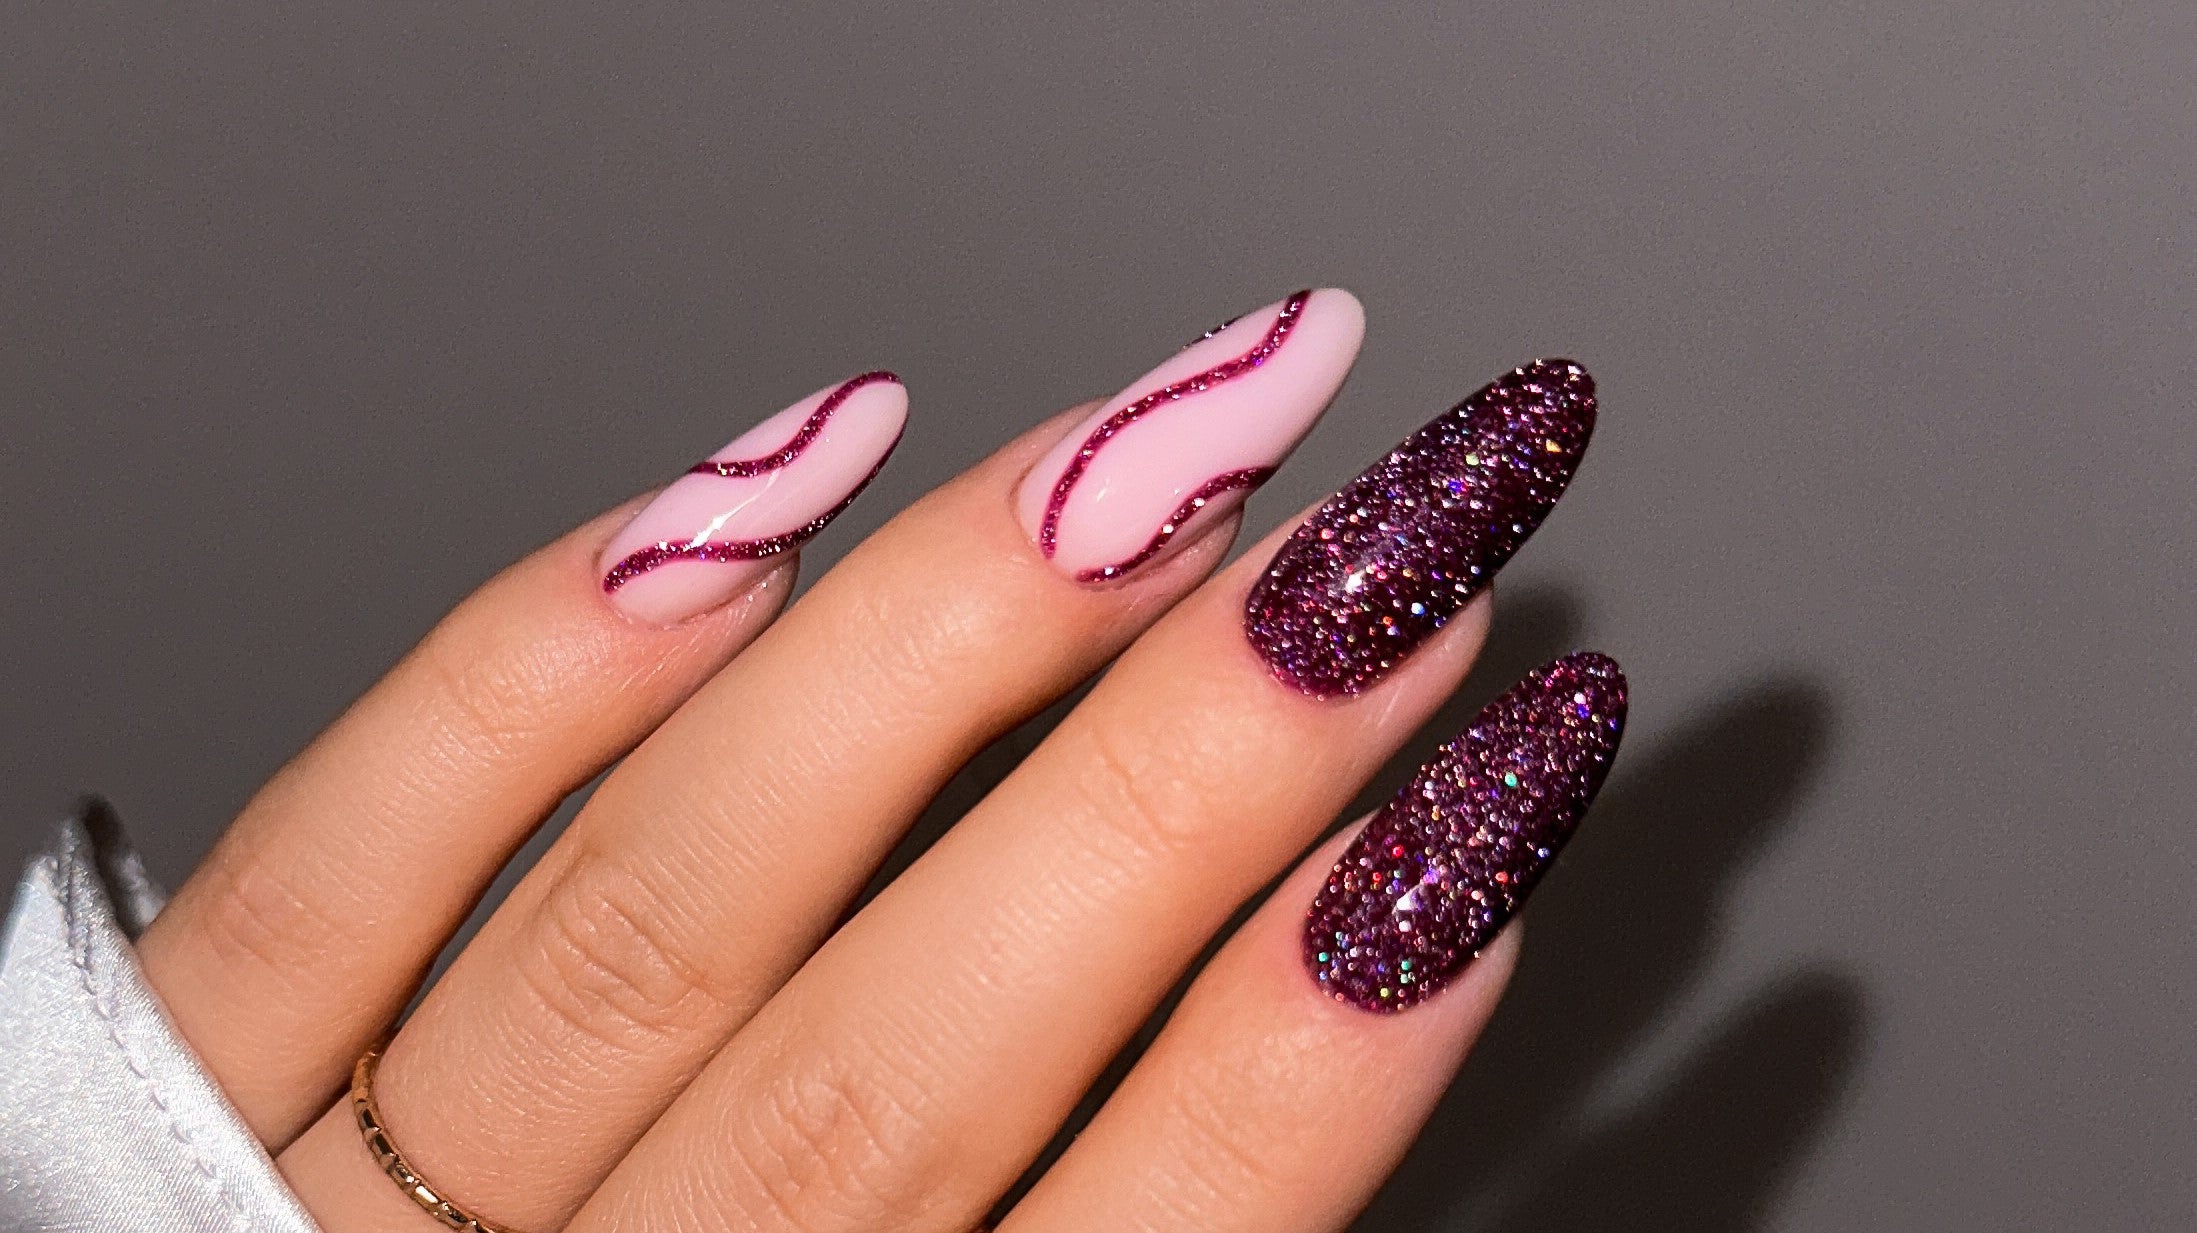 Glitter Manicure: Add Some Spark to Your Nails with Semilac